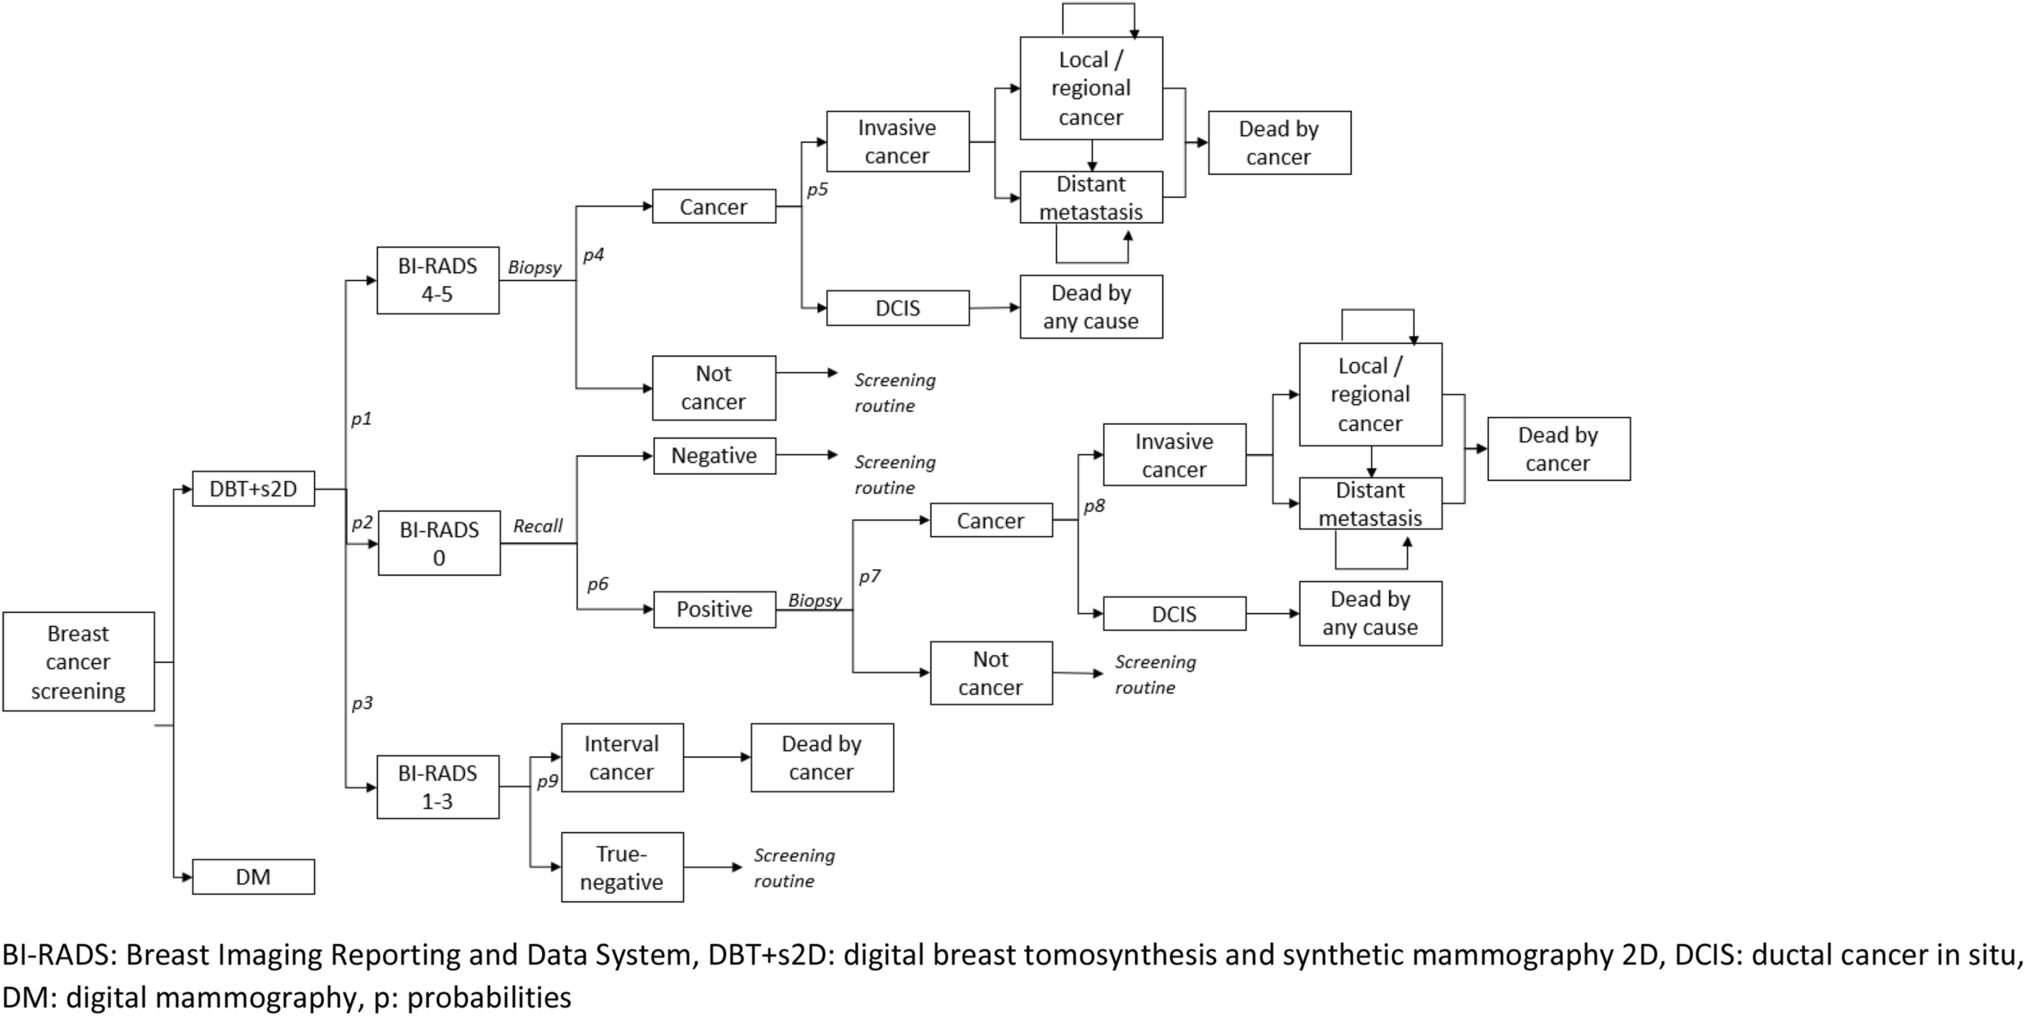 Cost-Effectiveness Analysis of Digital Breast Tomosynthesis Added to Synthetic Mammography in Breast Cancer Screening in Brazil